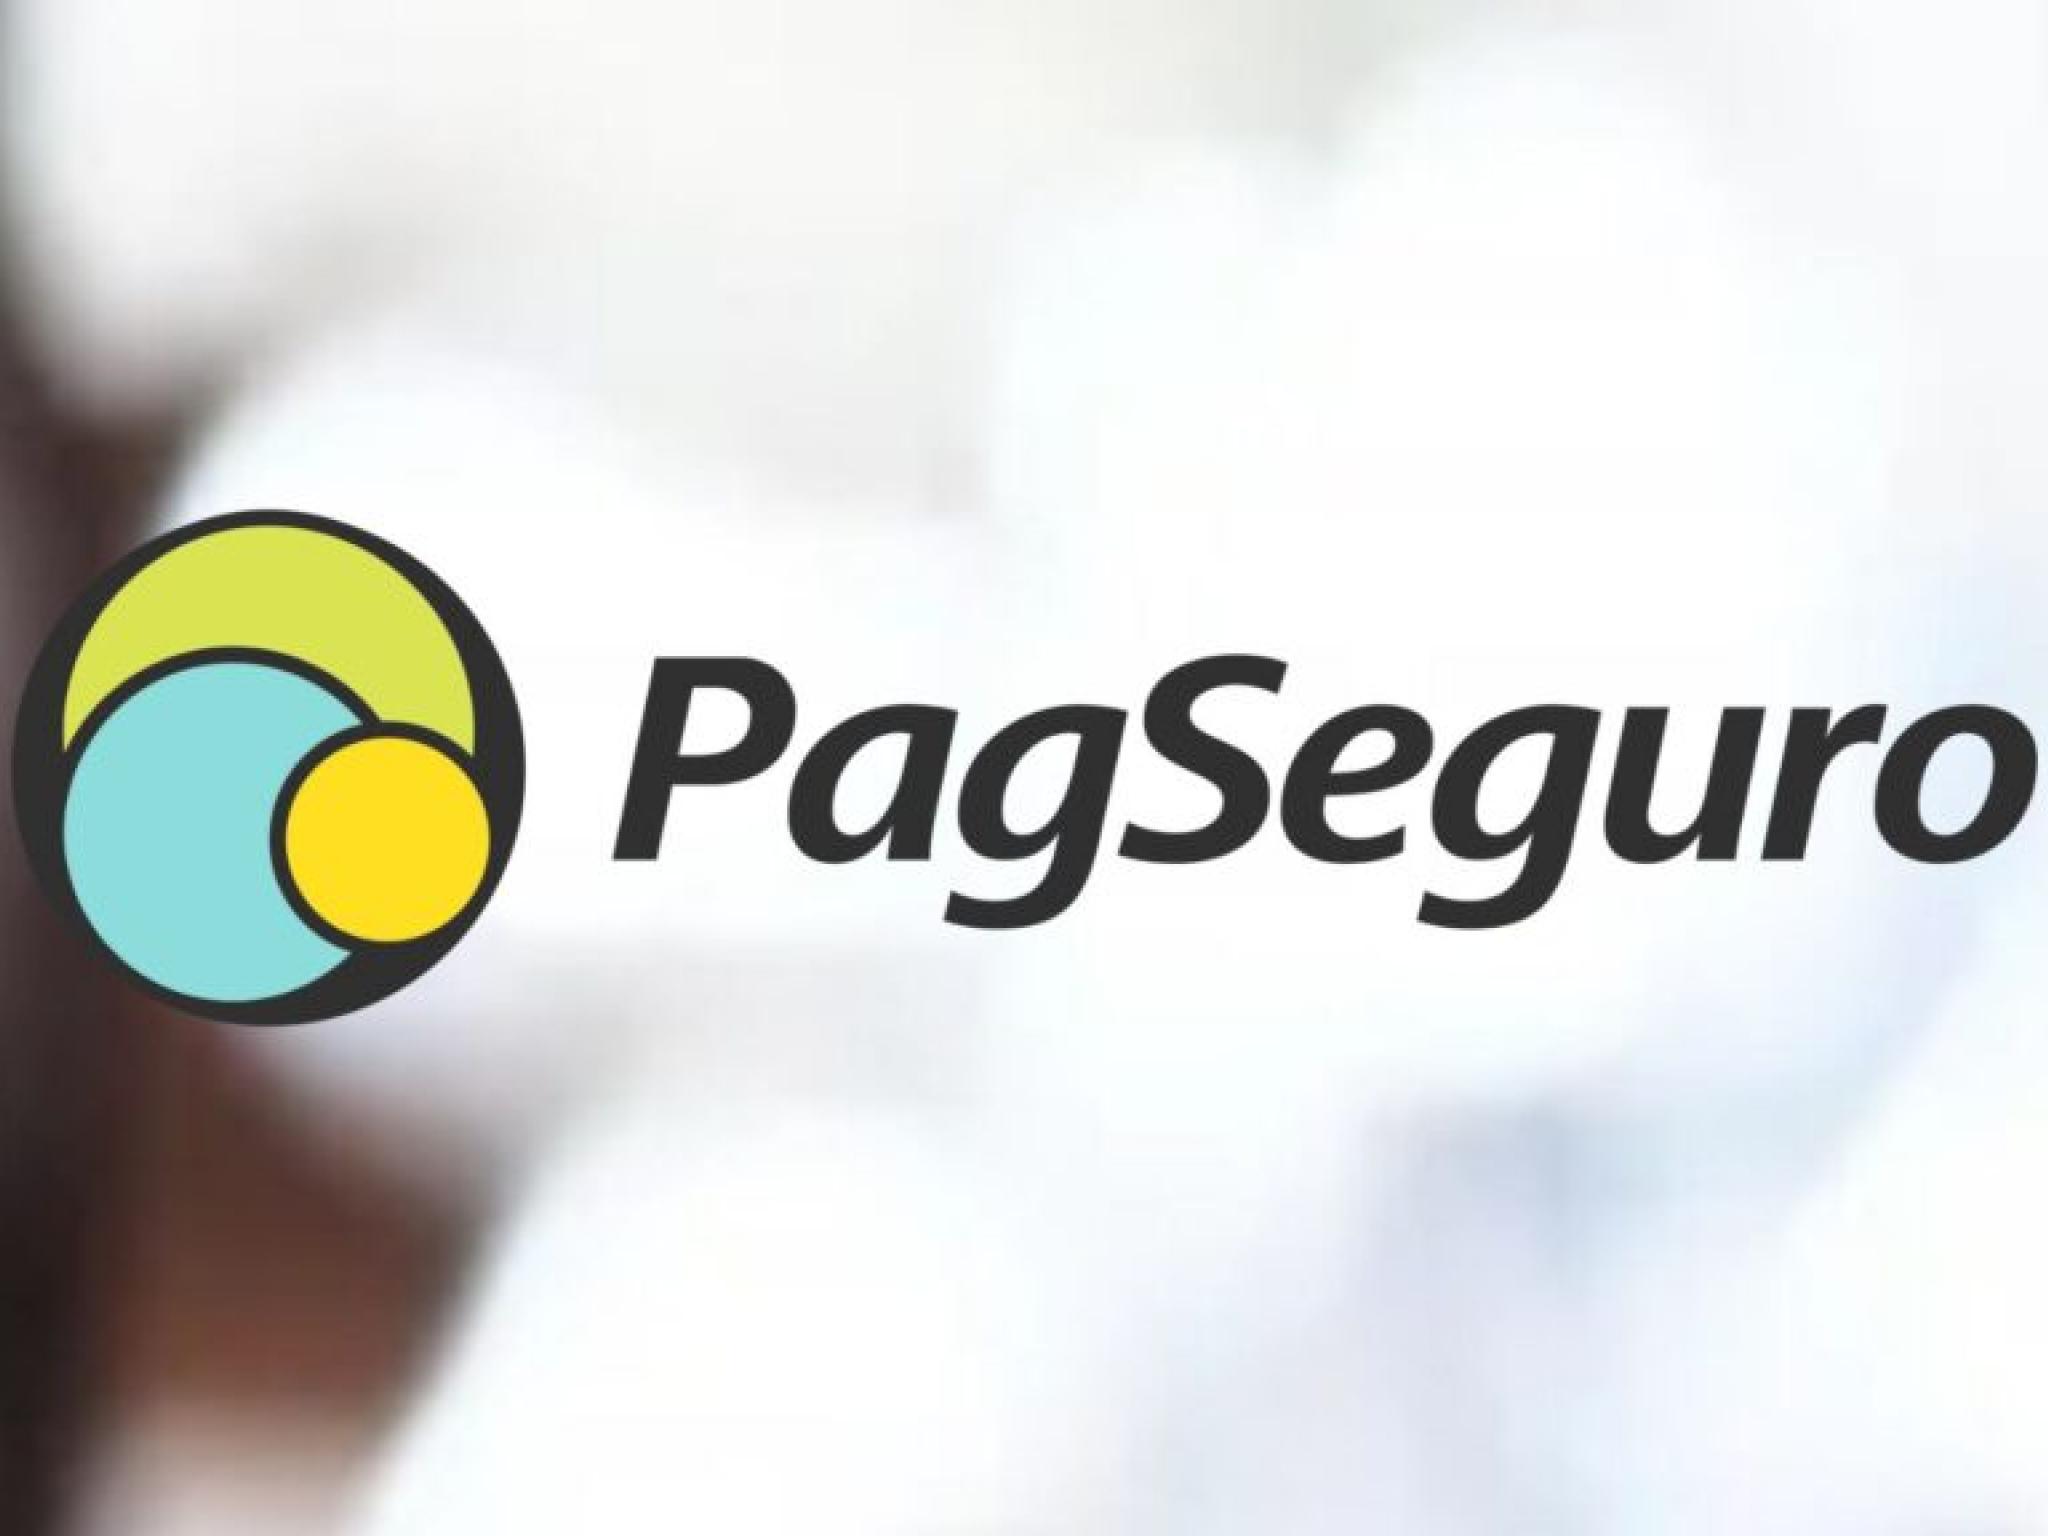  pagseguro-digitals-stock-has-reached-an-attractive-entry-point-says-bullish-analyst 